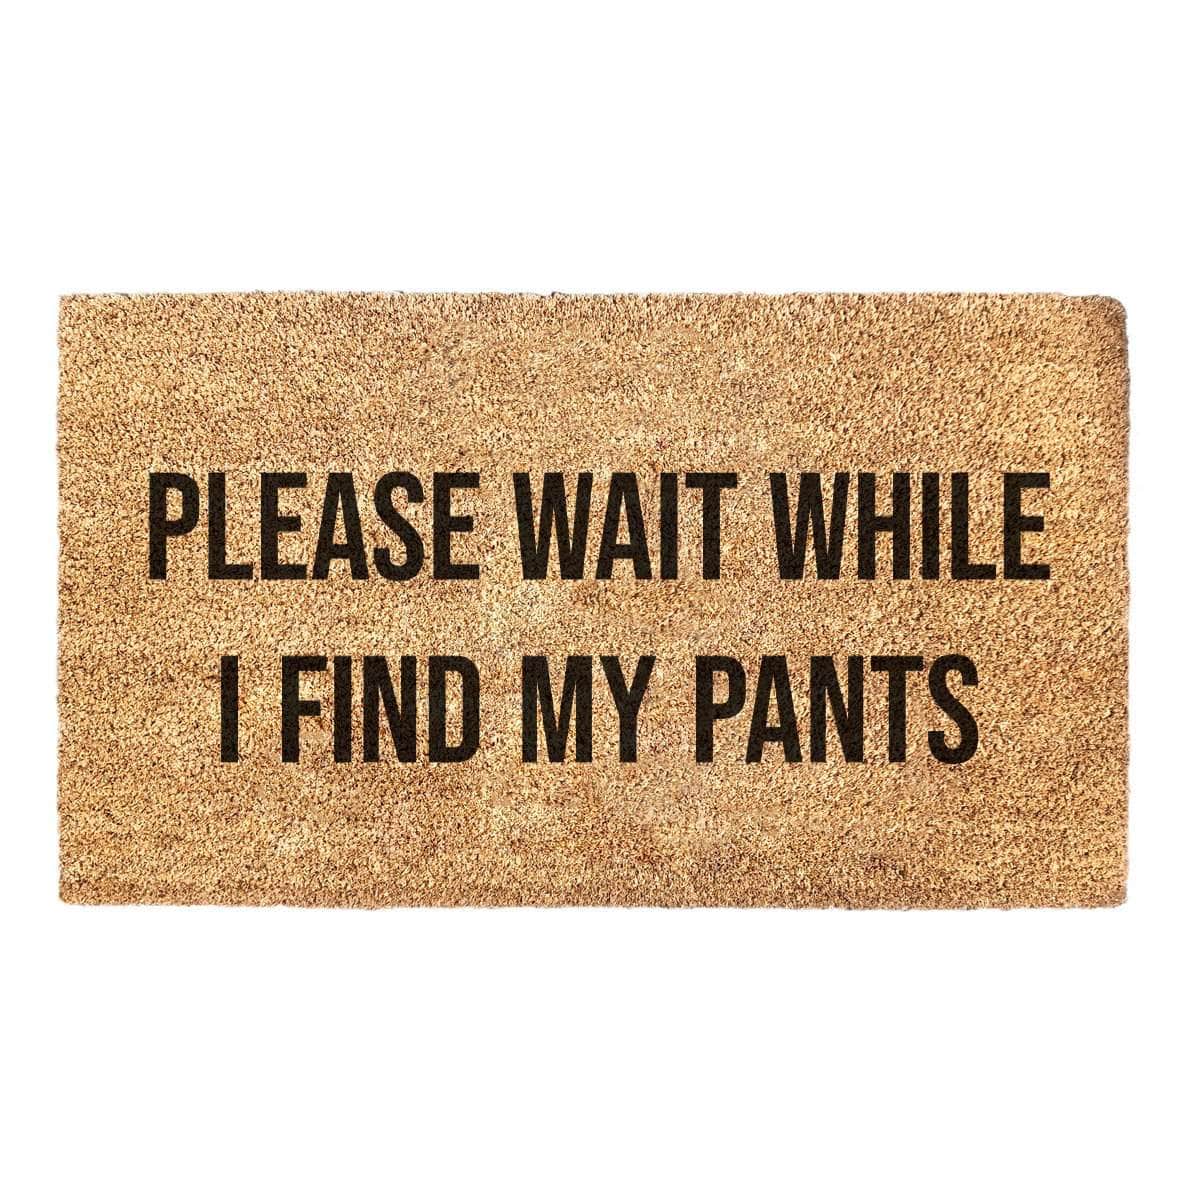 Please Wait While I Find My Pants - Doormat